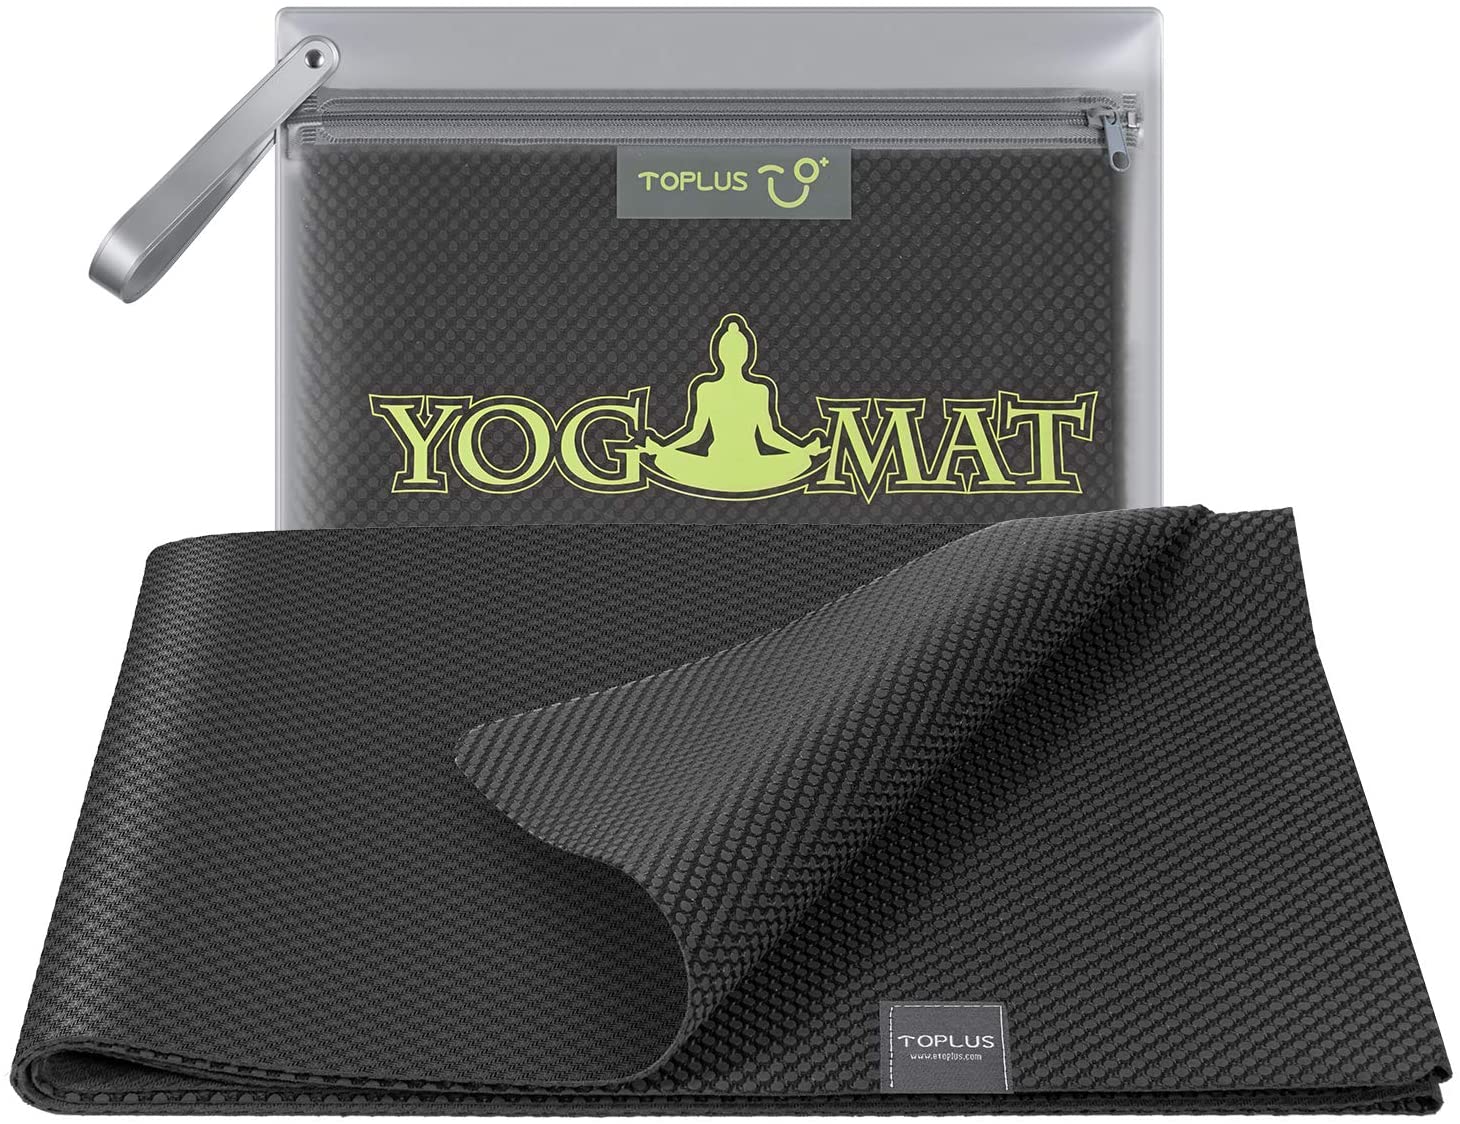 1/16-1/4 inch TOPLUS Yoga Mat Malus Spectabilis Non Slip Exercise Mat Made from Premium Material Non-Toxic High Performance Grip Coming with Carry Strap or Bag